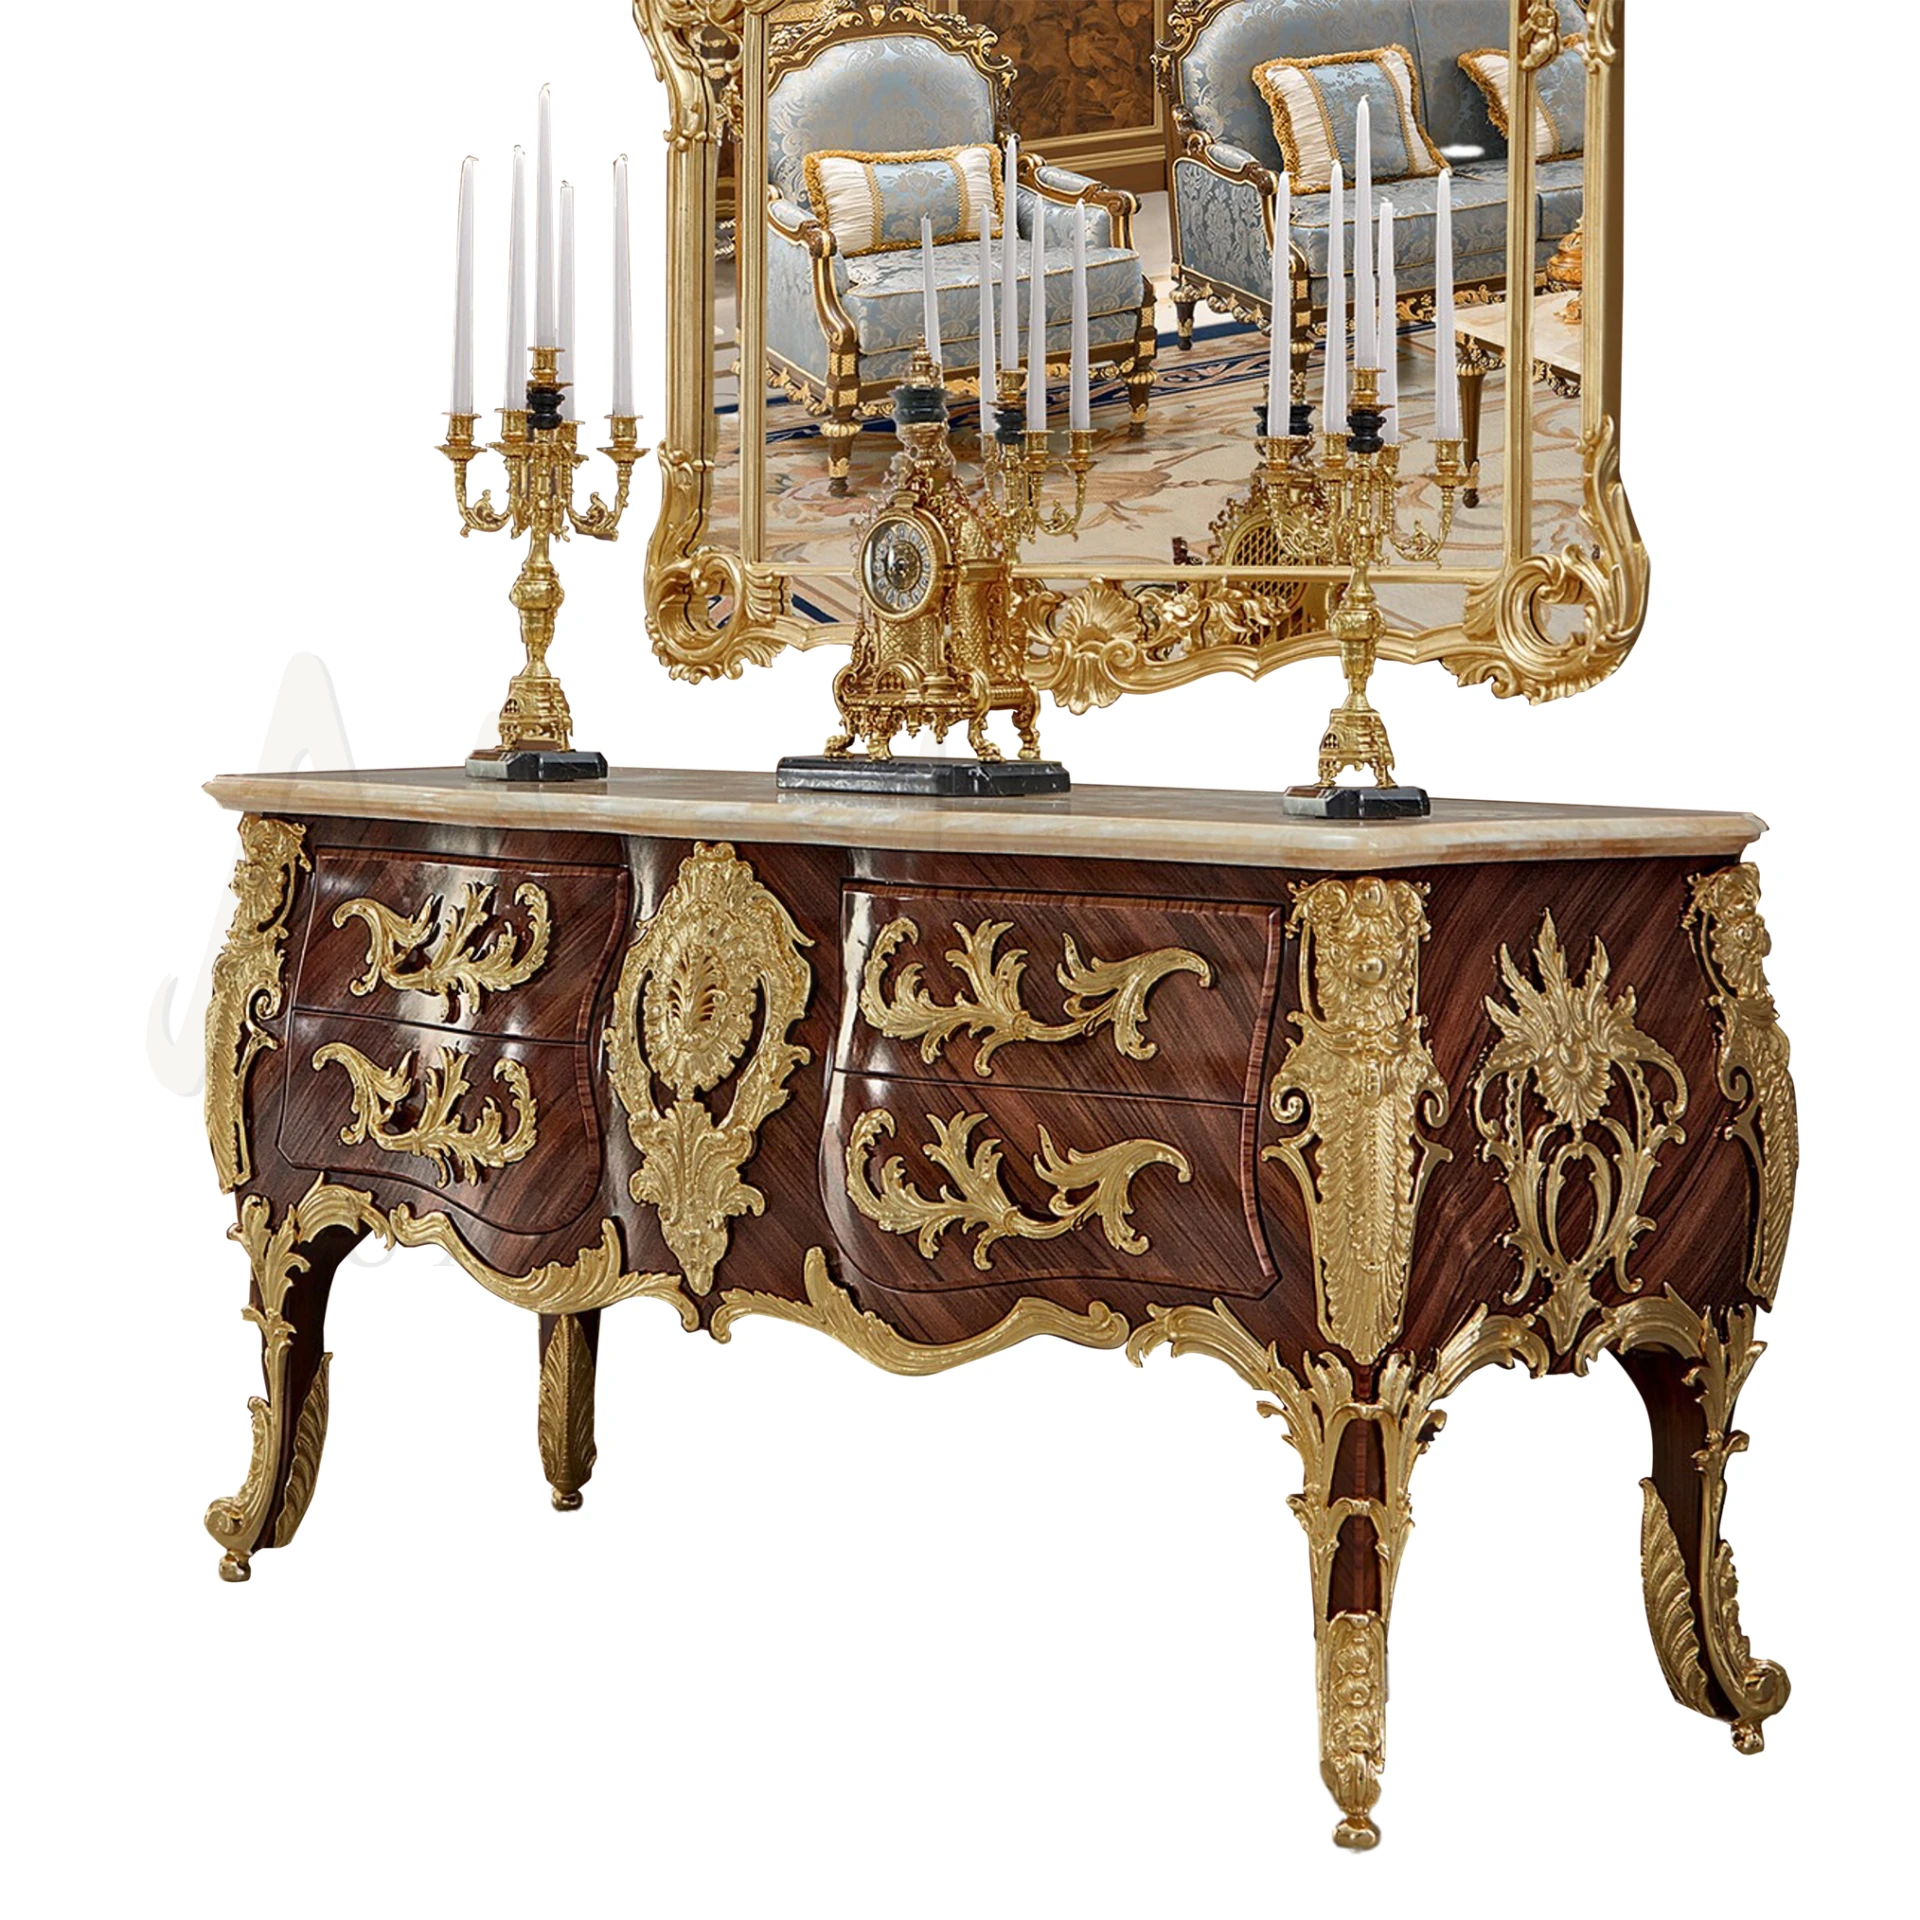 Luxury Imperial 4-drawers sideboard with carved motifs, and gold trim against an elegant backdrop